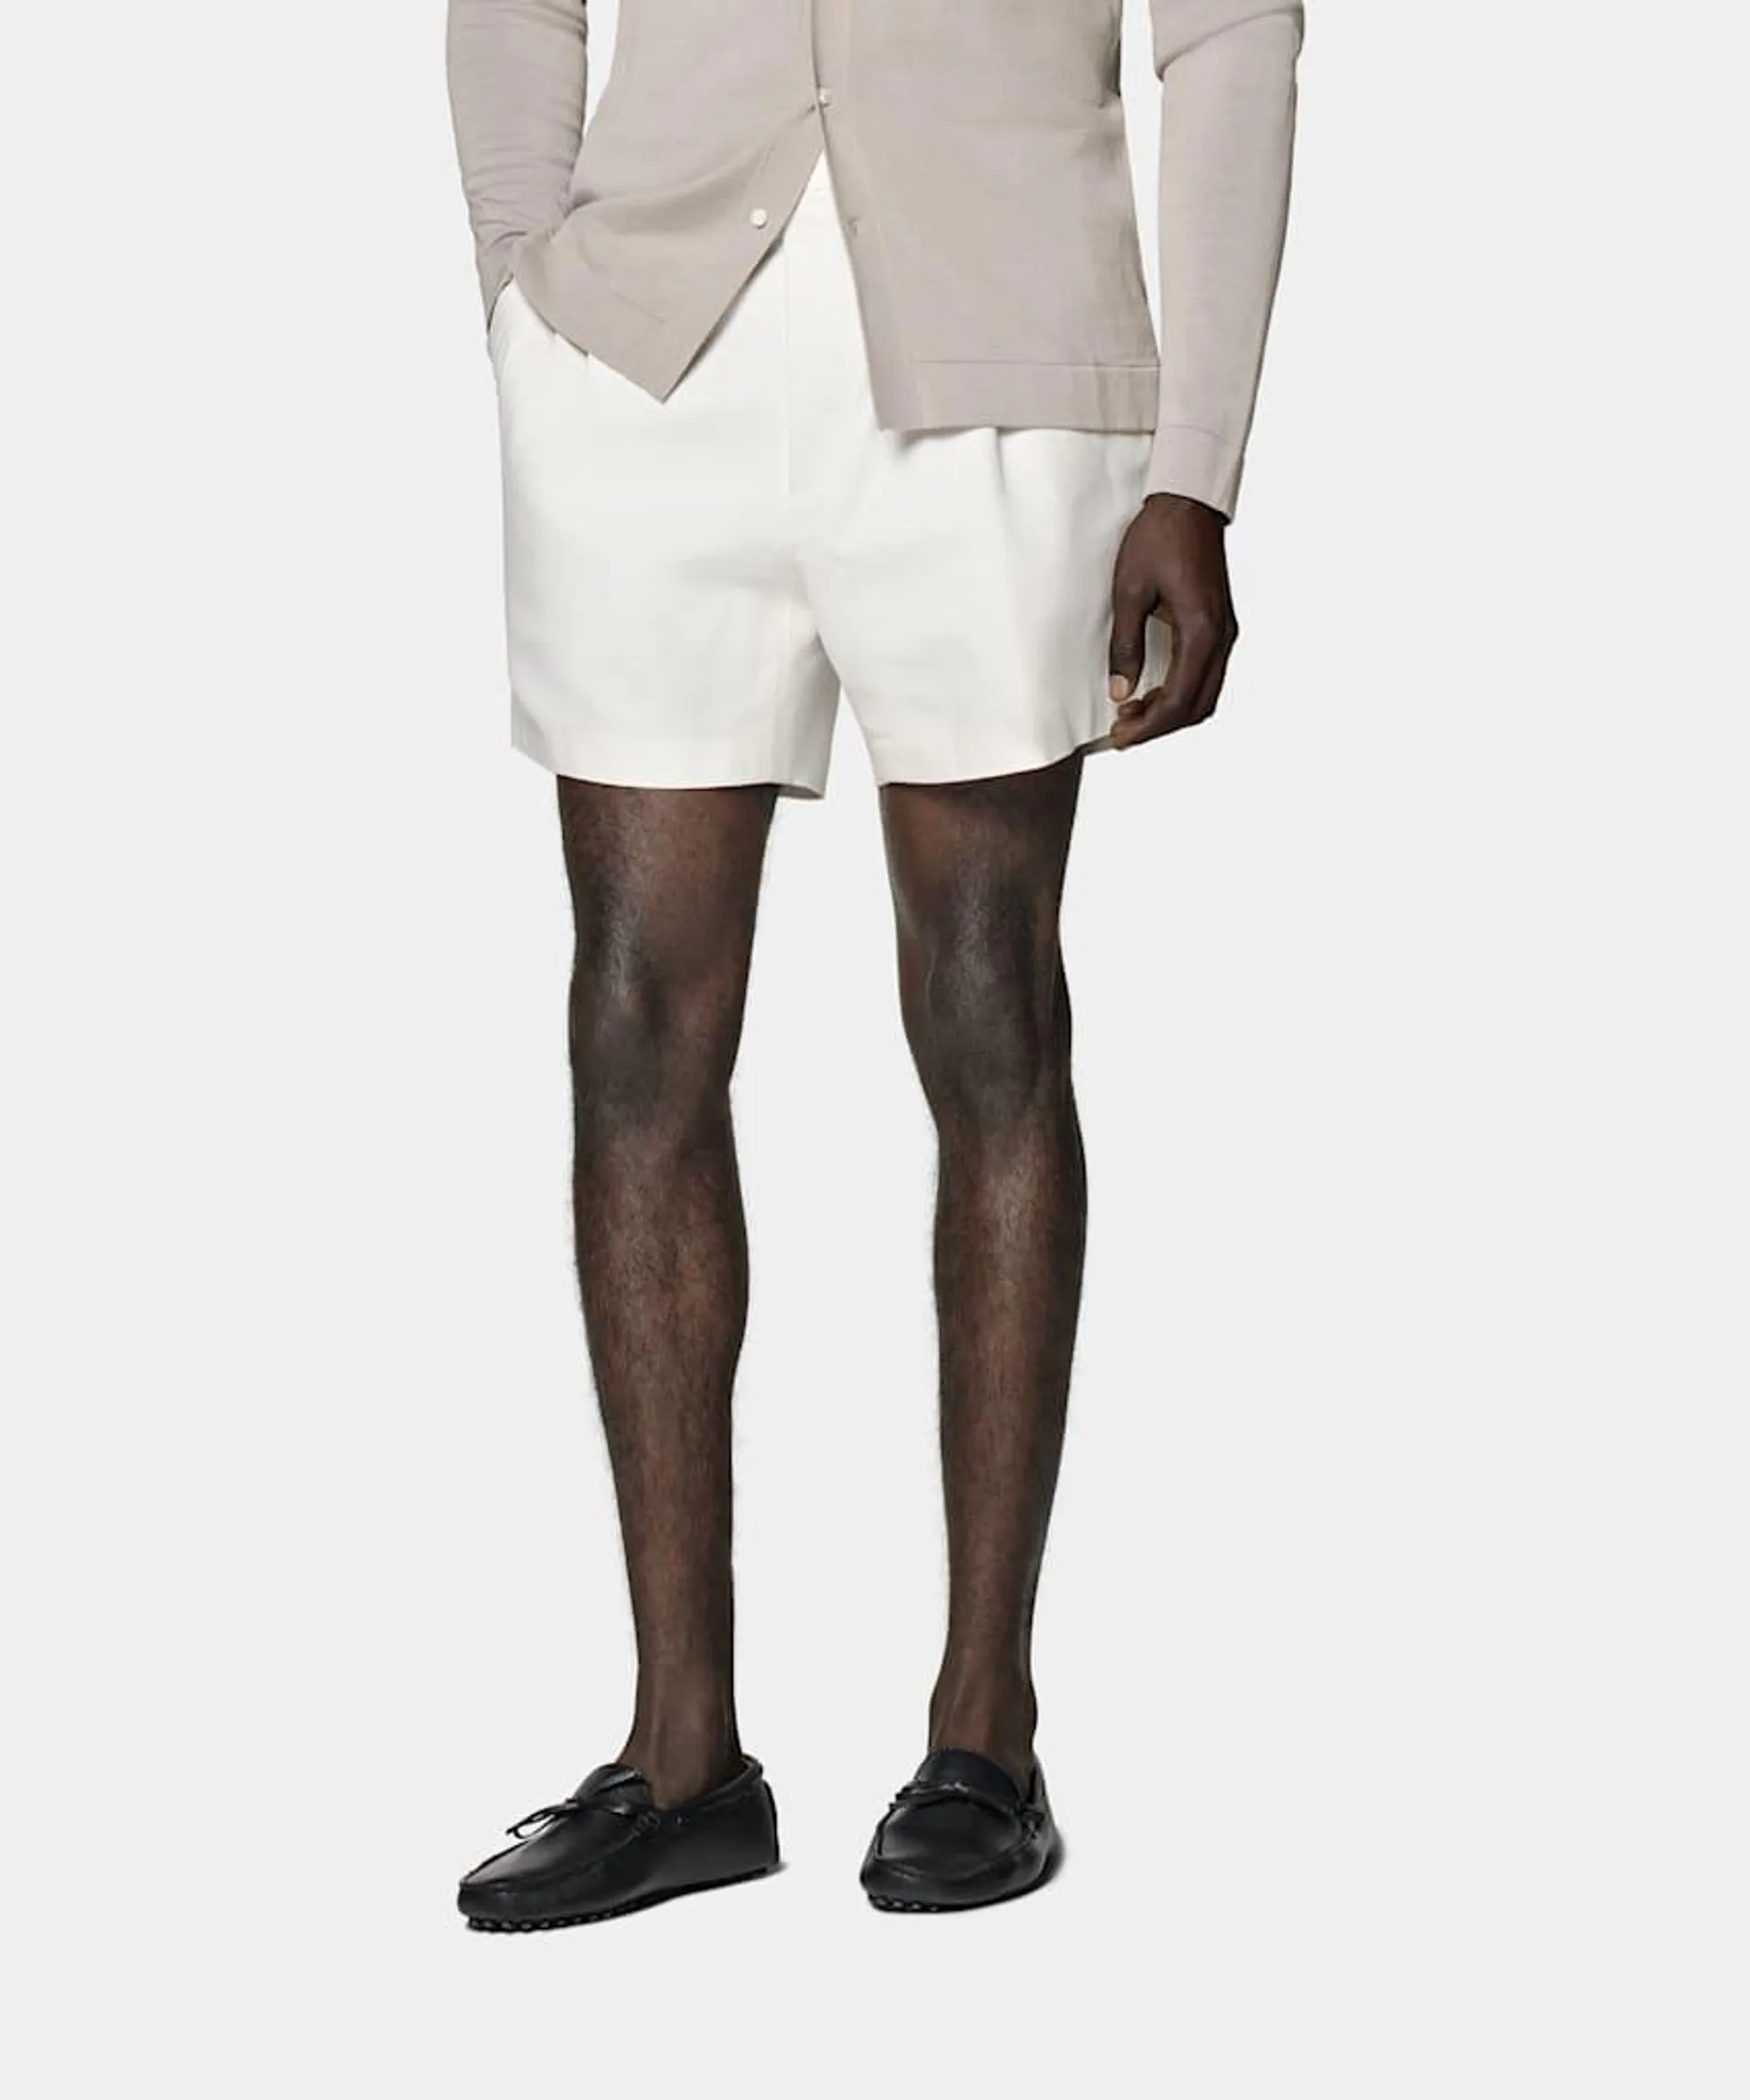 Cut to a mid-thigh length with a high-rise waist, these relaxed fit white Duca shorts feature a single pleat and side adjusters for an elevated comfortable summery vibe.